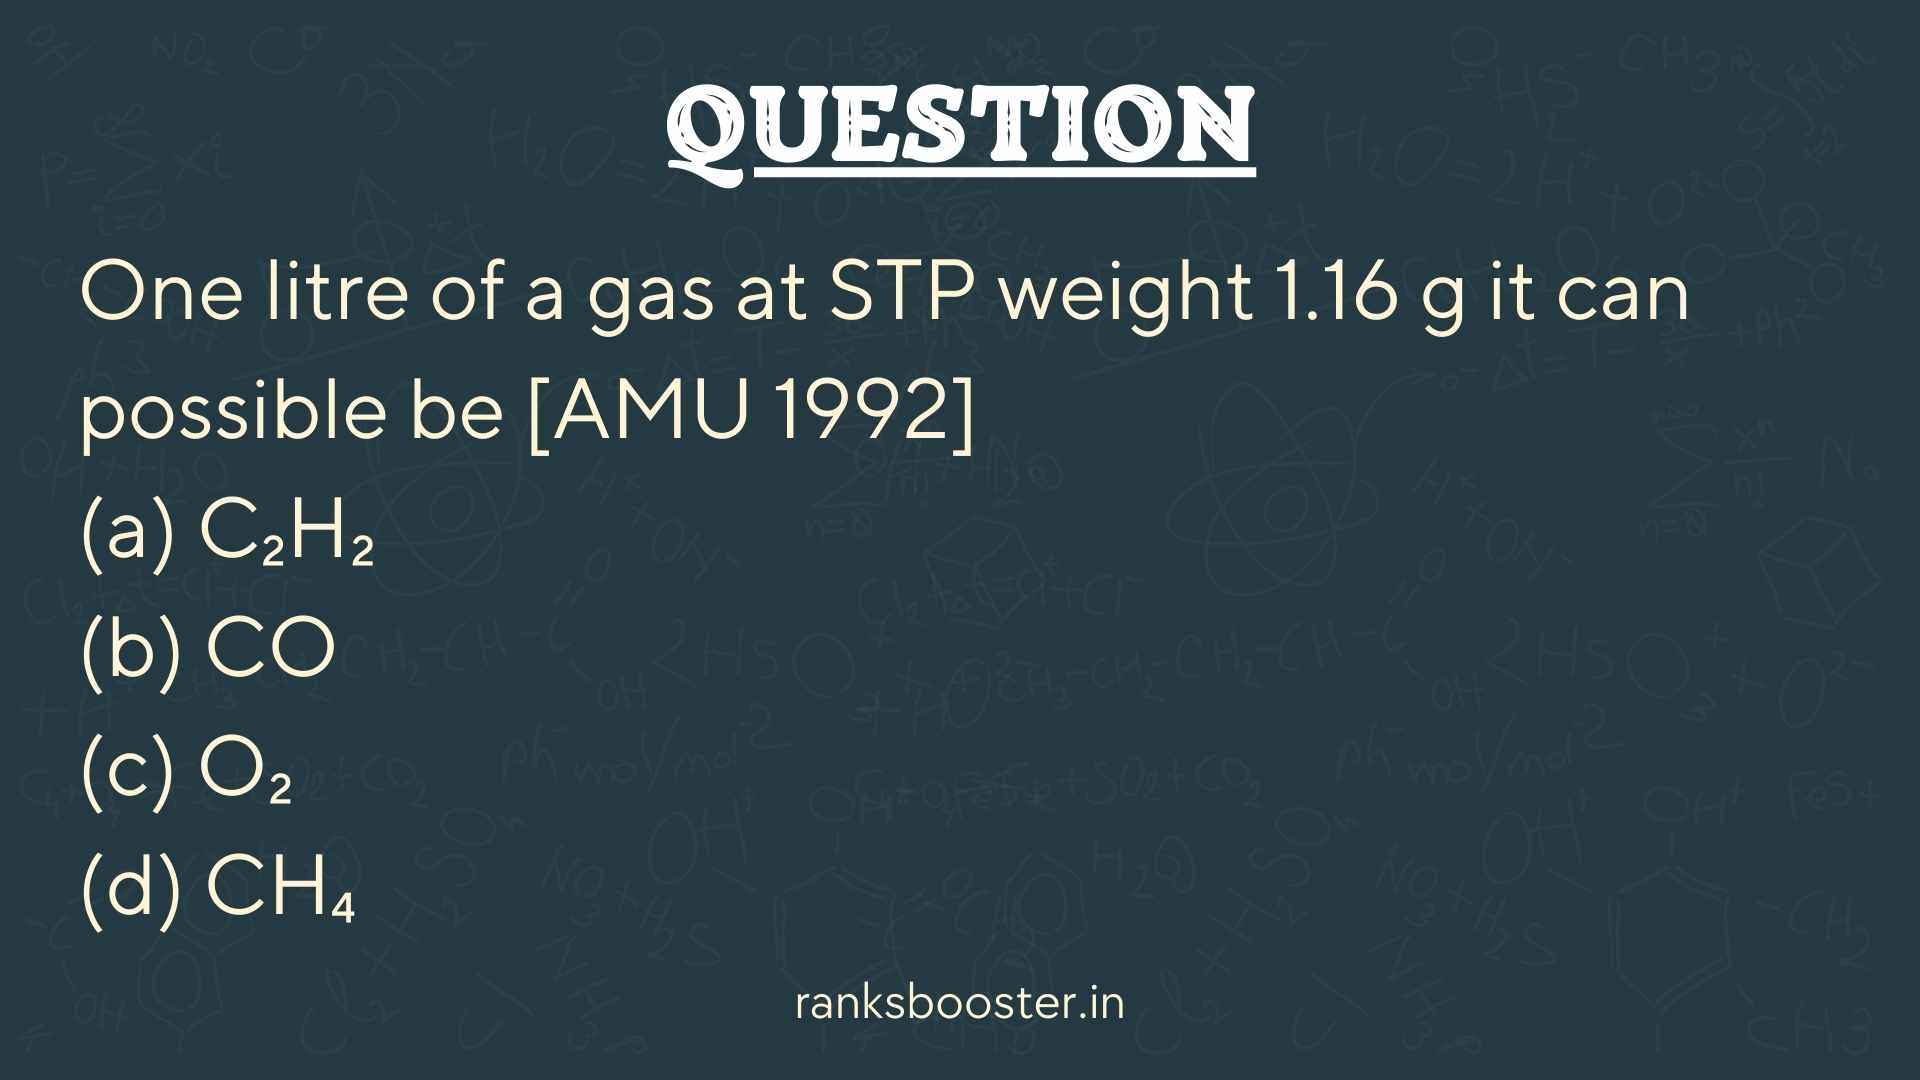 Question: One litre of a gas at STP weight 1.16 g it can possible be [AMU 1992] (a) C₂H₂ (b) CO (c) O₂ (d) CH₄